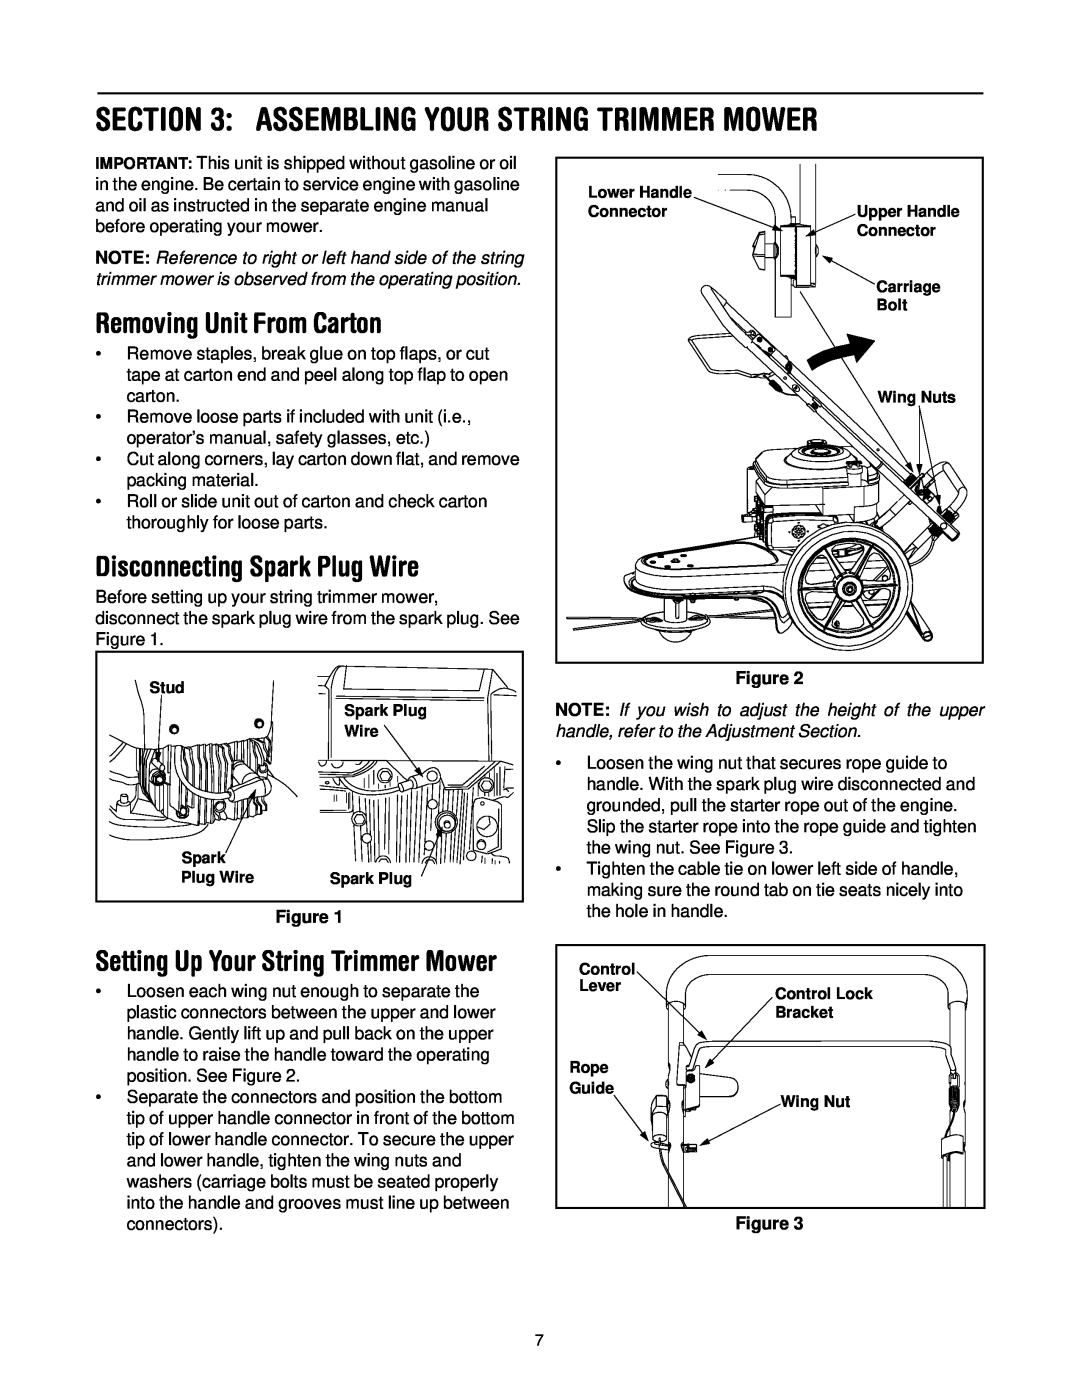 Troy-Bilt 258 manual Assembling Your String Trimmer Mower, Removing Unit From Carton, Disconnecting Spark Plug Wire 